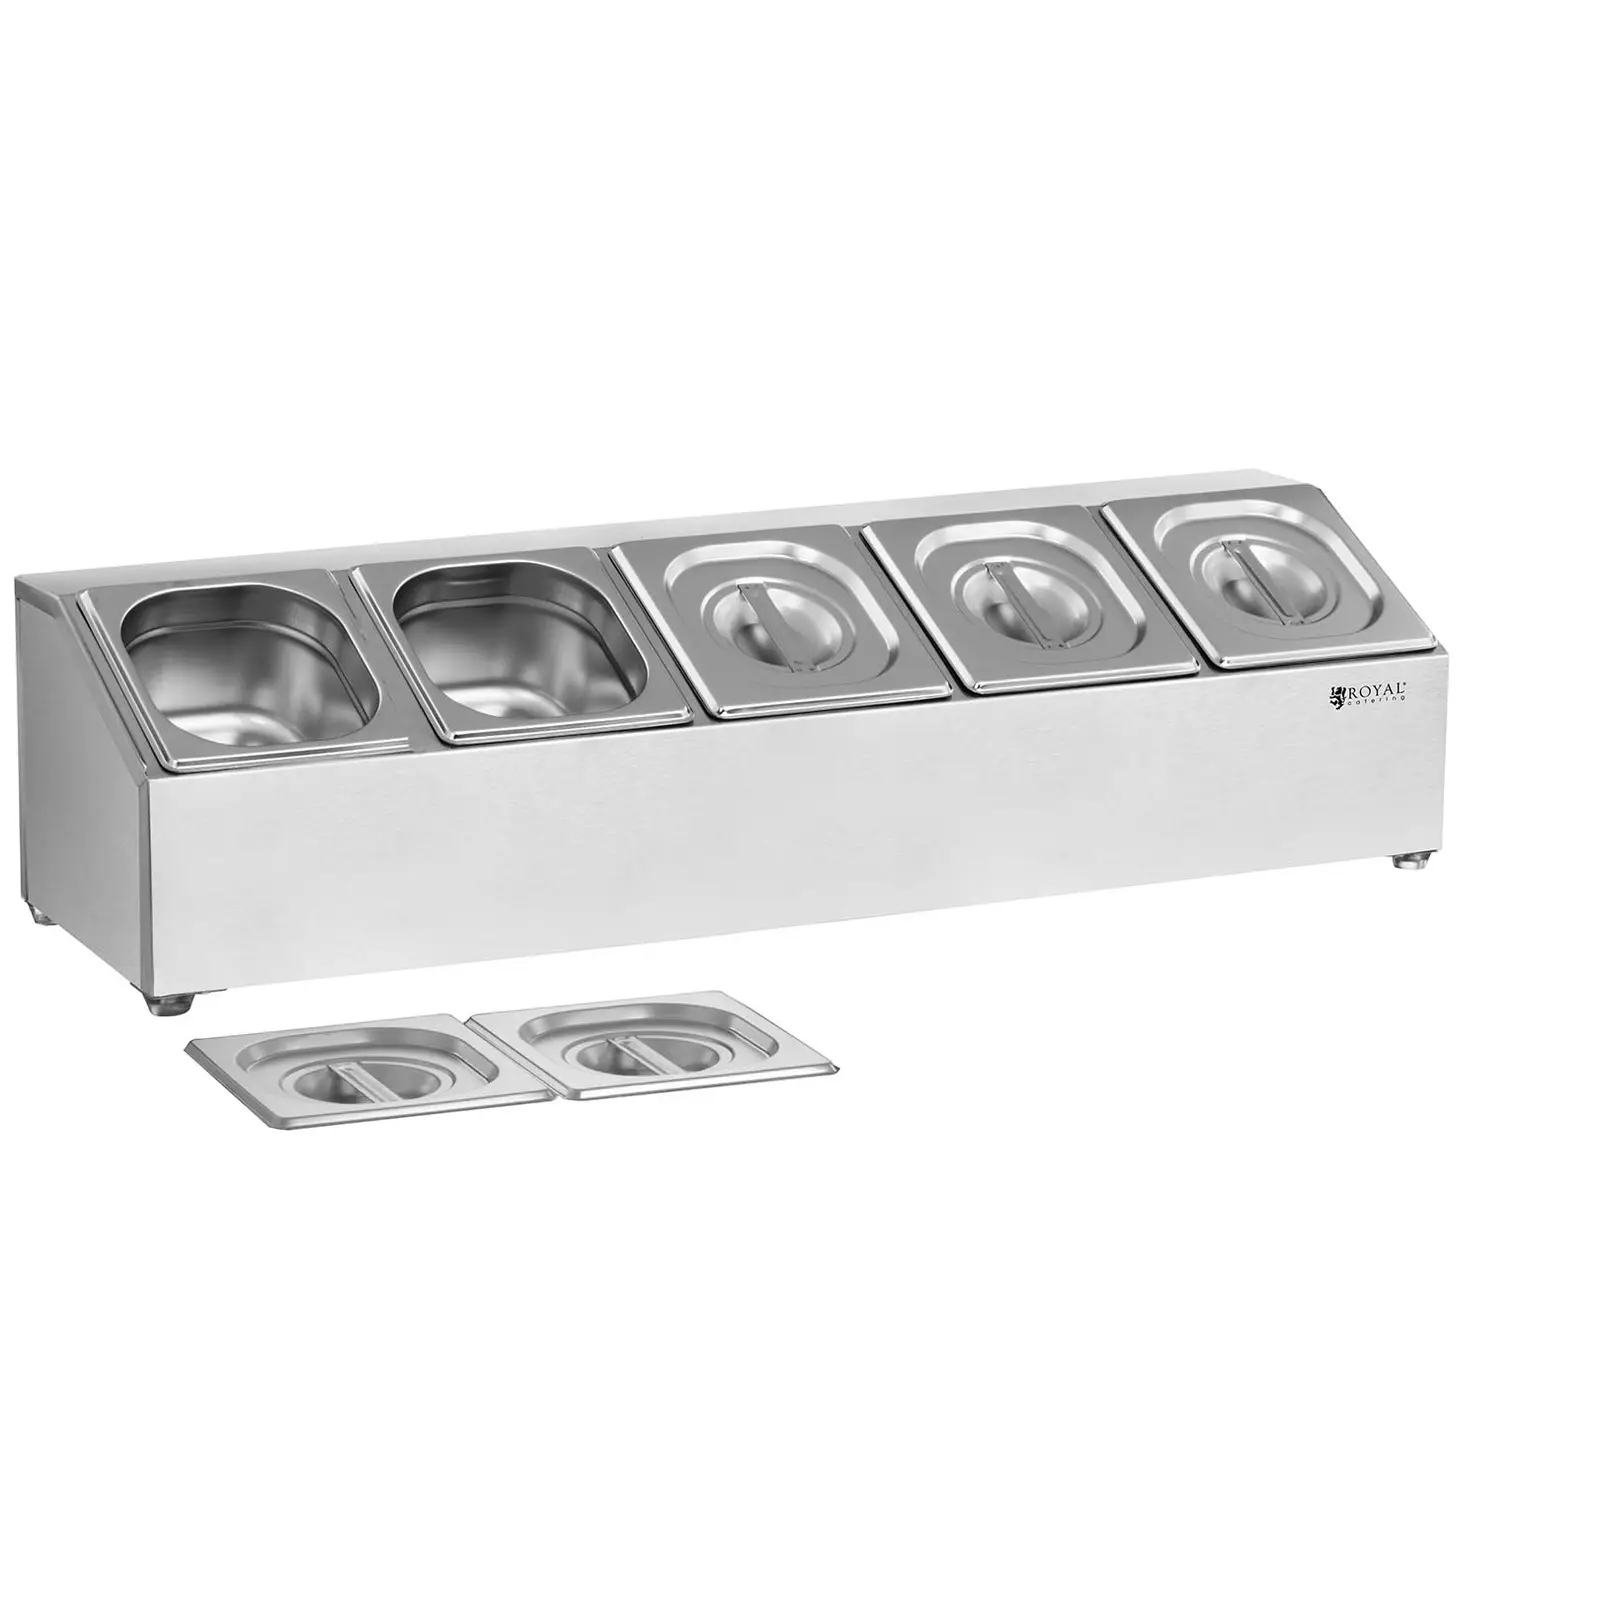 Gastronorm Pan Holder - Incl. 5 GN 1/6 Gastronorm Containers with Lids